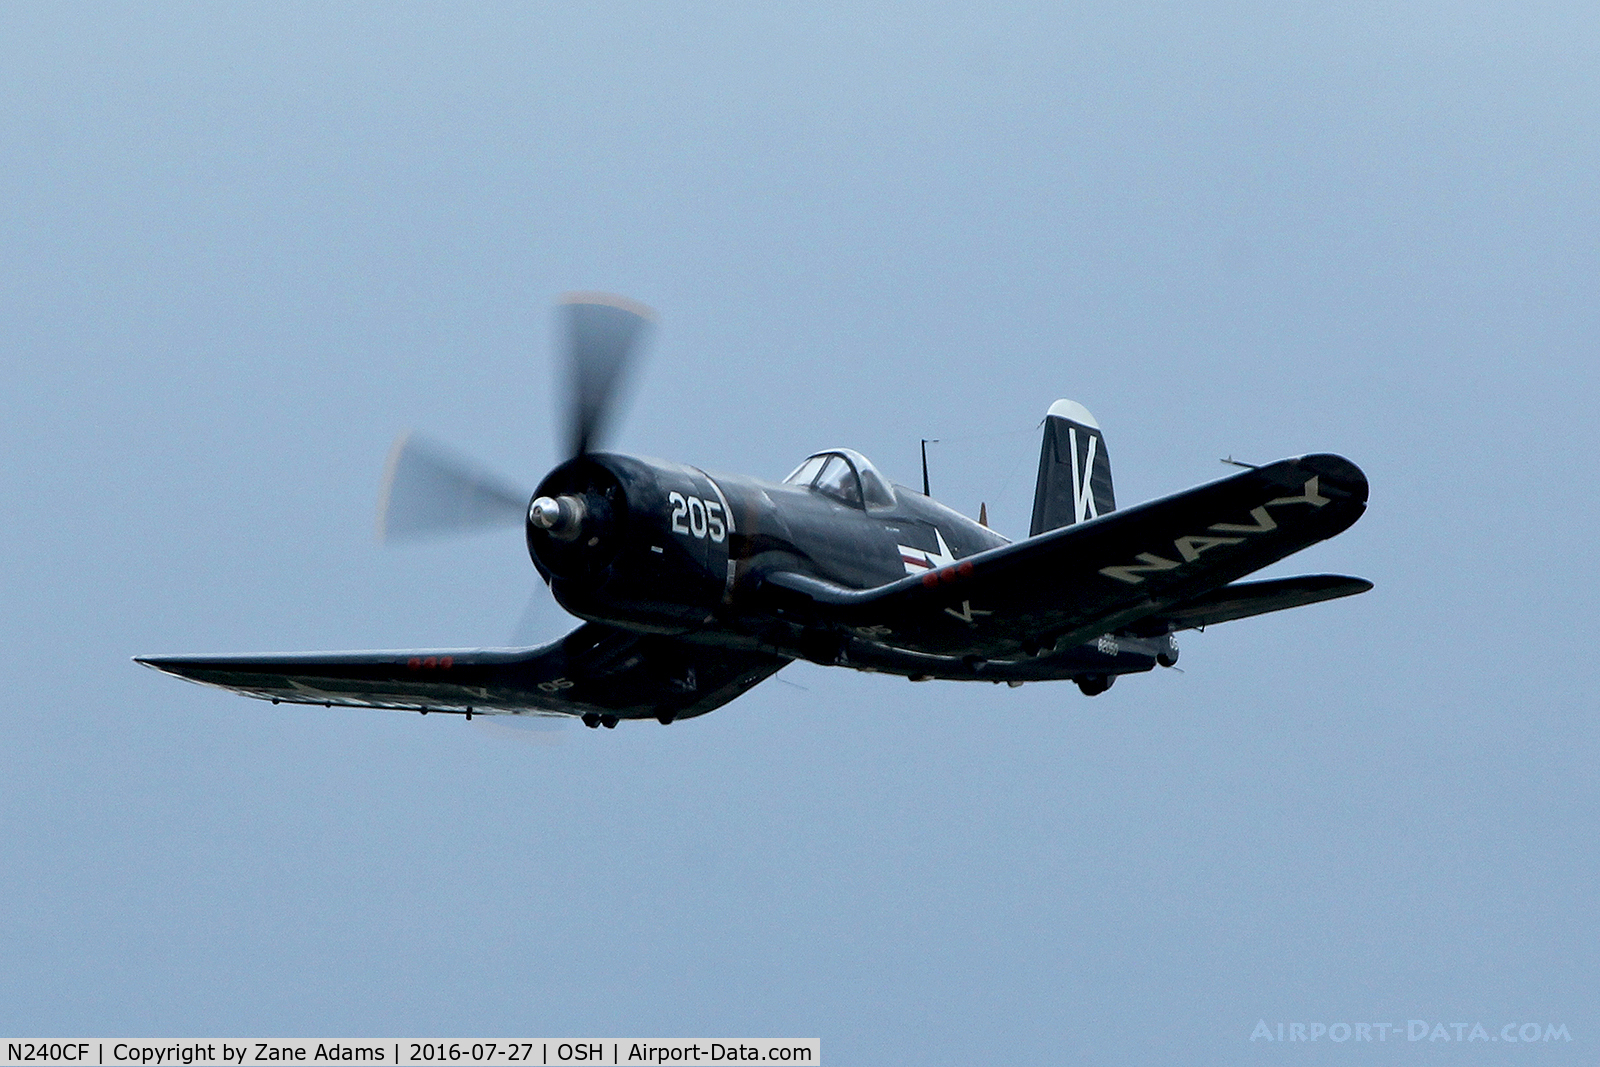 N240CF, 1945 Vought F4U-4 Corsair C/N 9513, his war mongering posture that lead to the outbreak of war to begin with